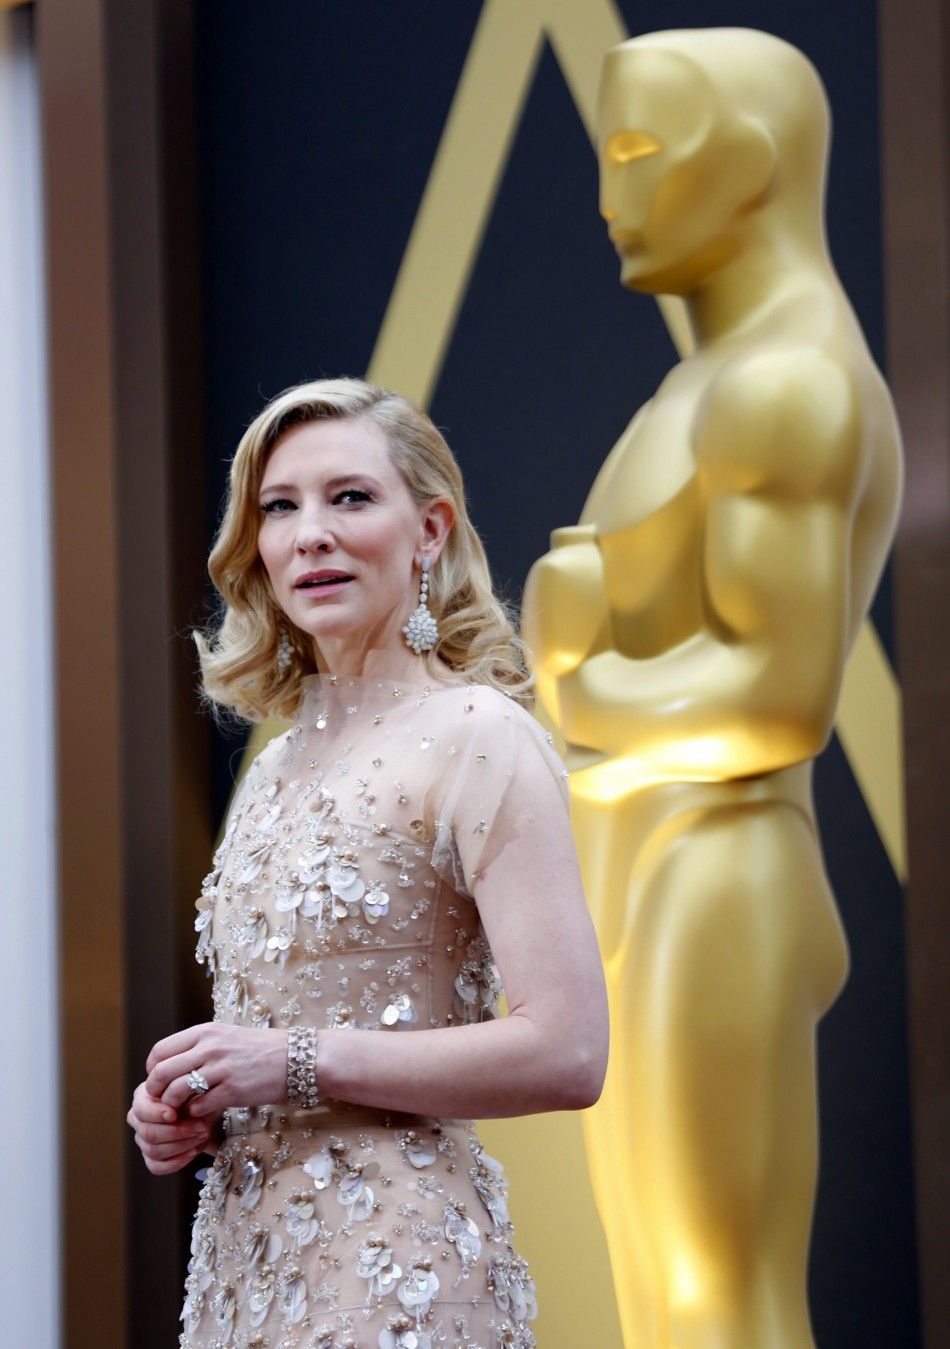 Cate Blanchett, best actress nominee for her role in quotBlue Jasmine,quot wears a nude Armani gown with metallic embellishments as she arrives at the 86th Academy Awards in Hollywood